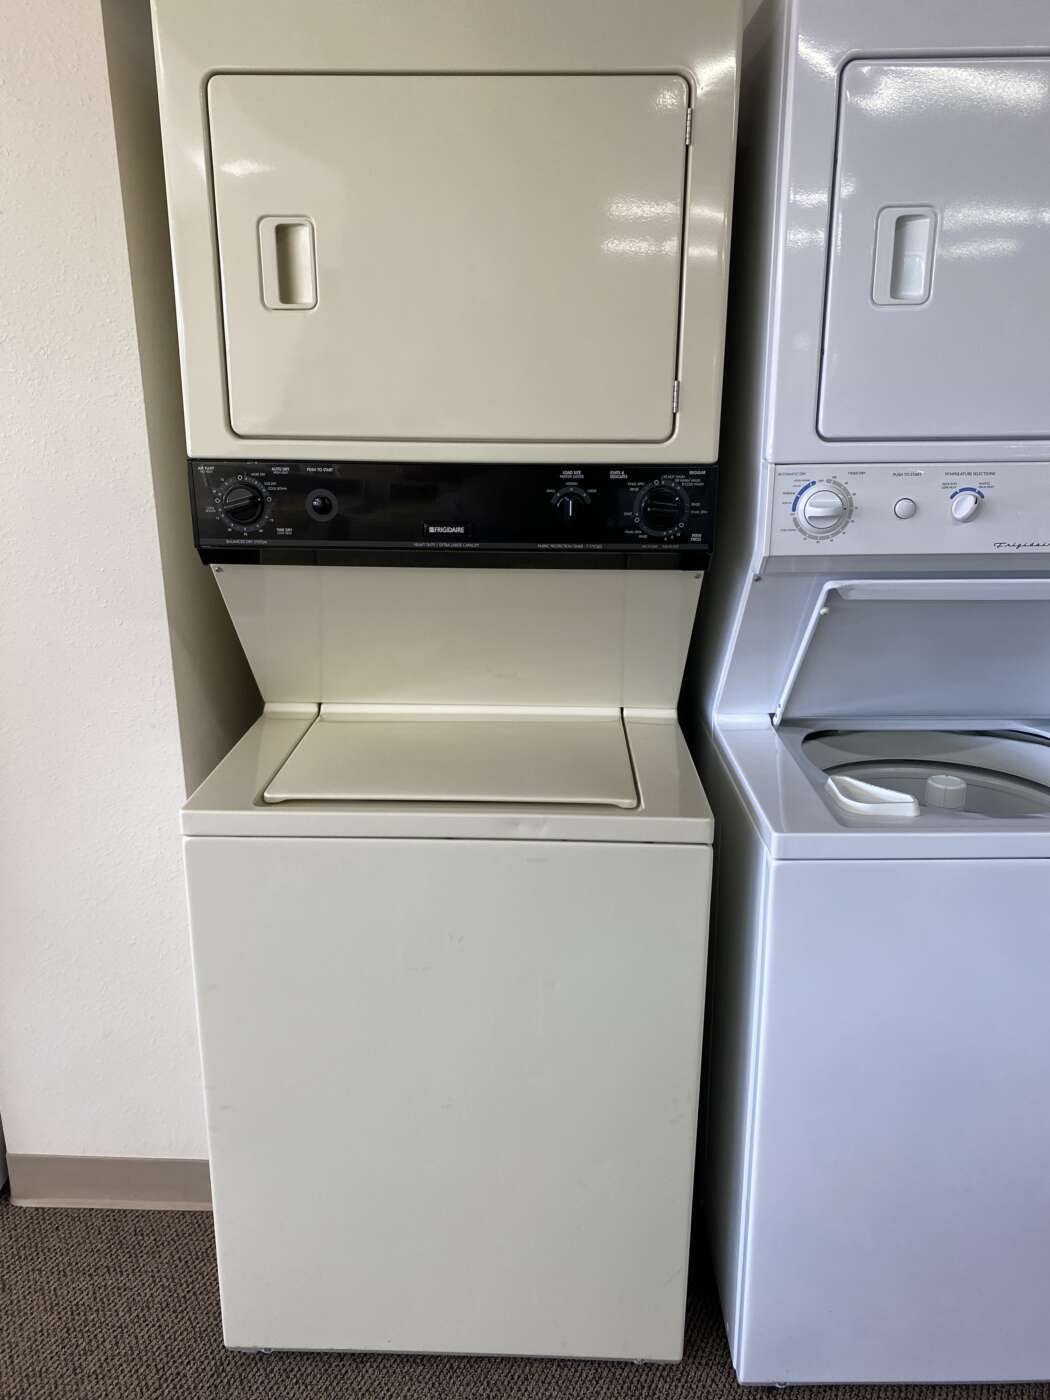 Reconditioned FRIGIDAIRE 2.7 Cu. Ft. Top-Load Washer & 5.7 Cu. Ft. Electric Dryer – Almond